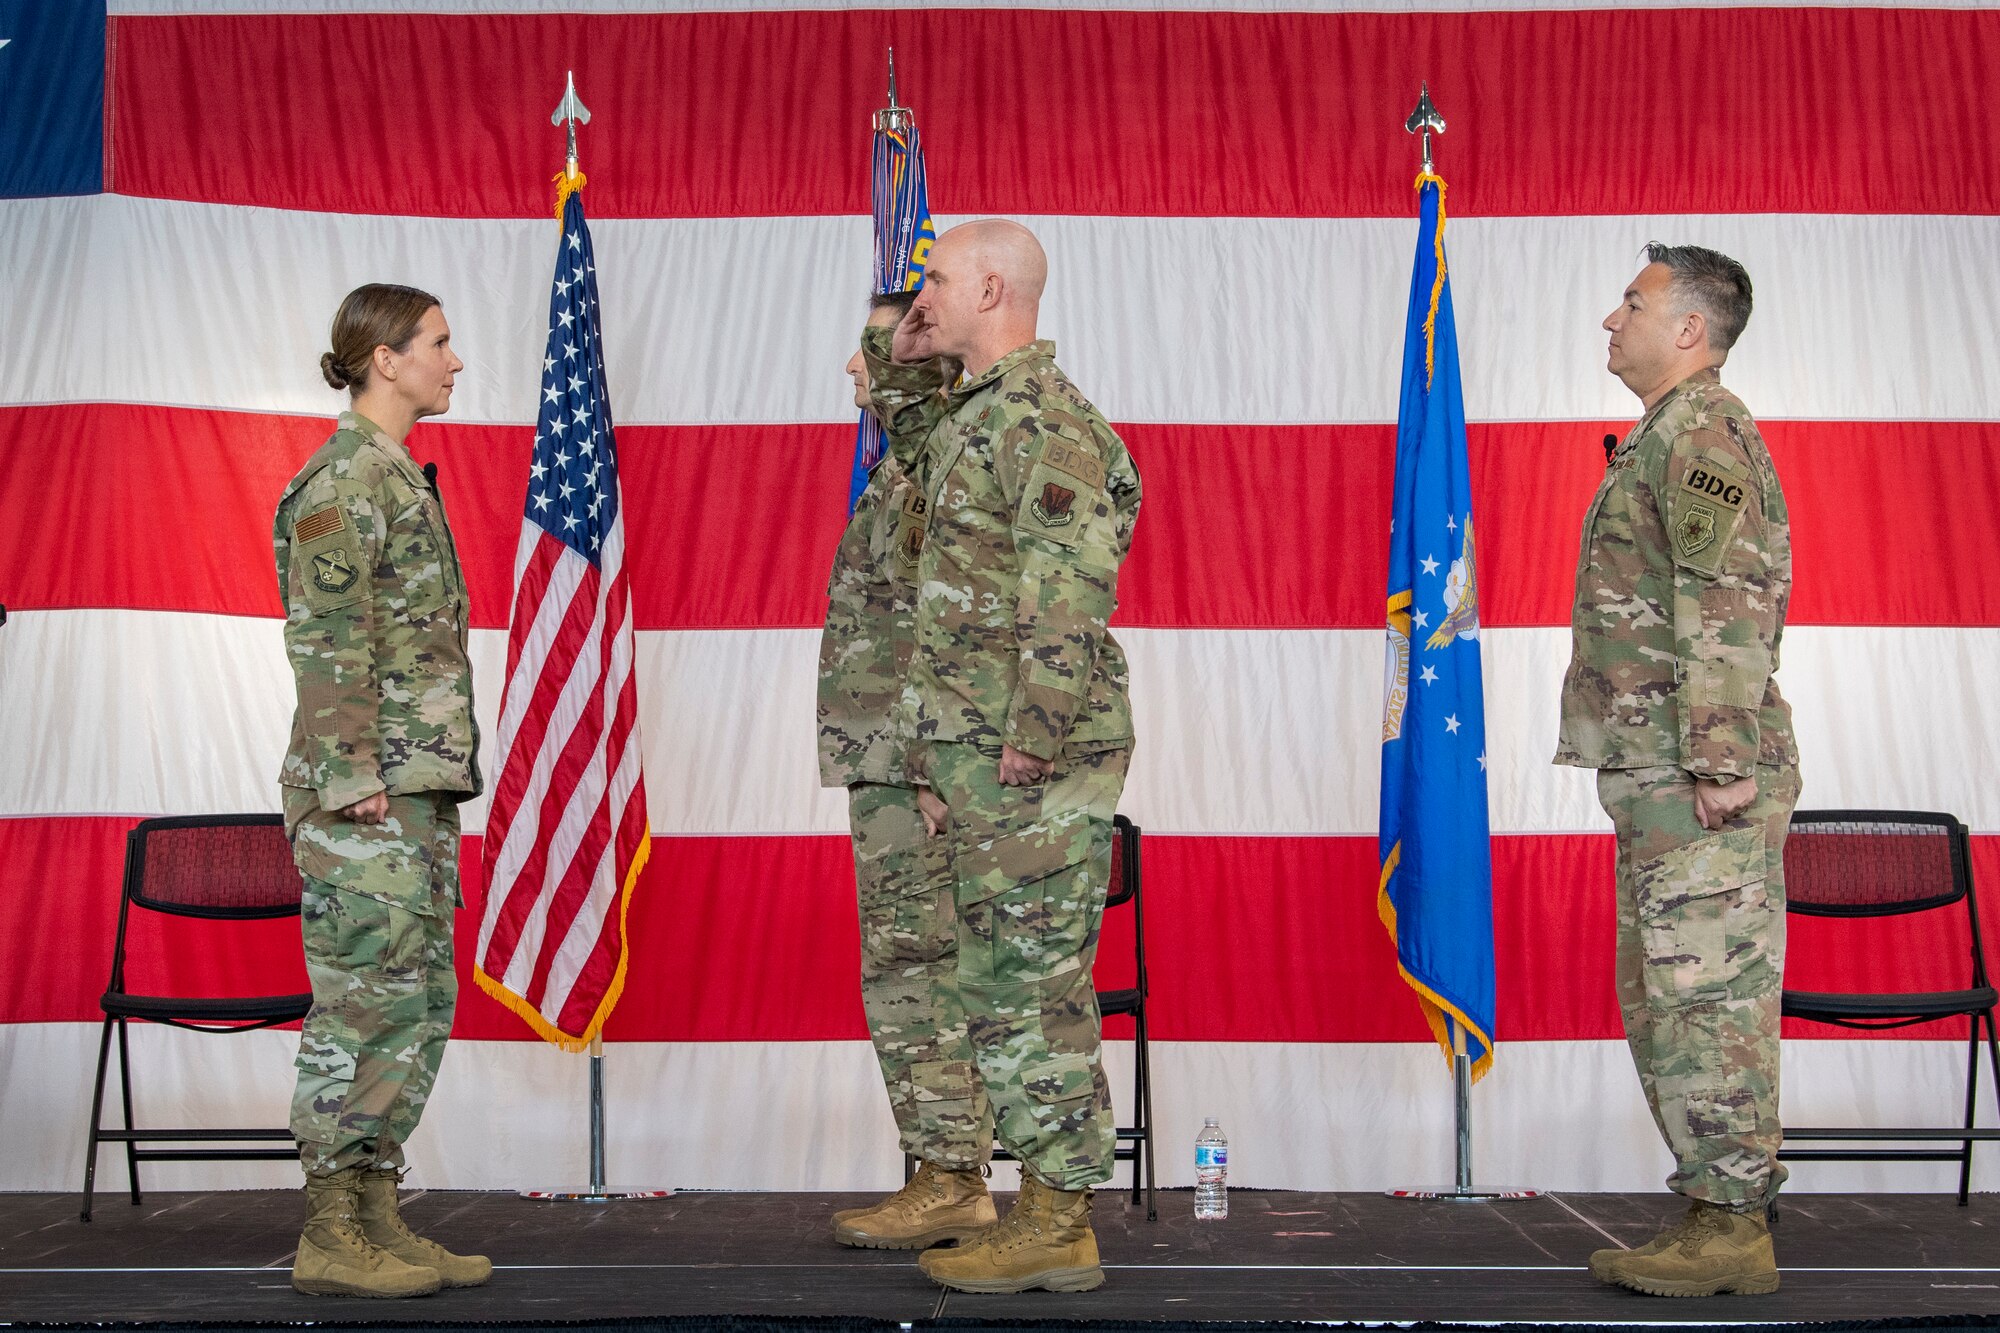 Col. Weyand assumes command of the 820th BDG